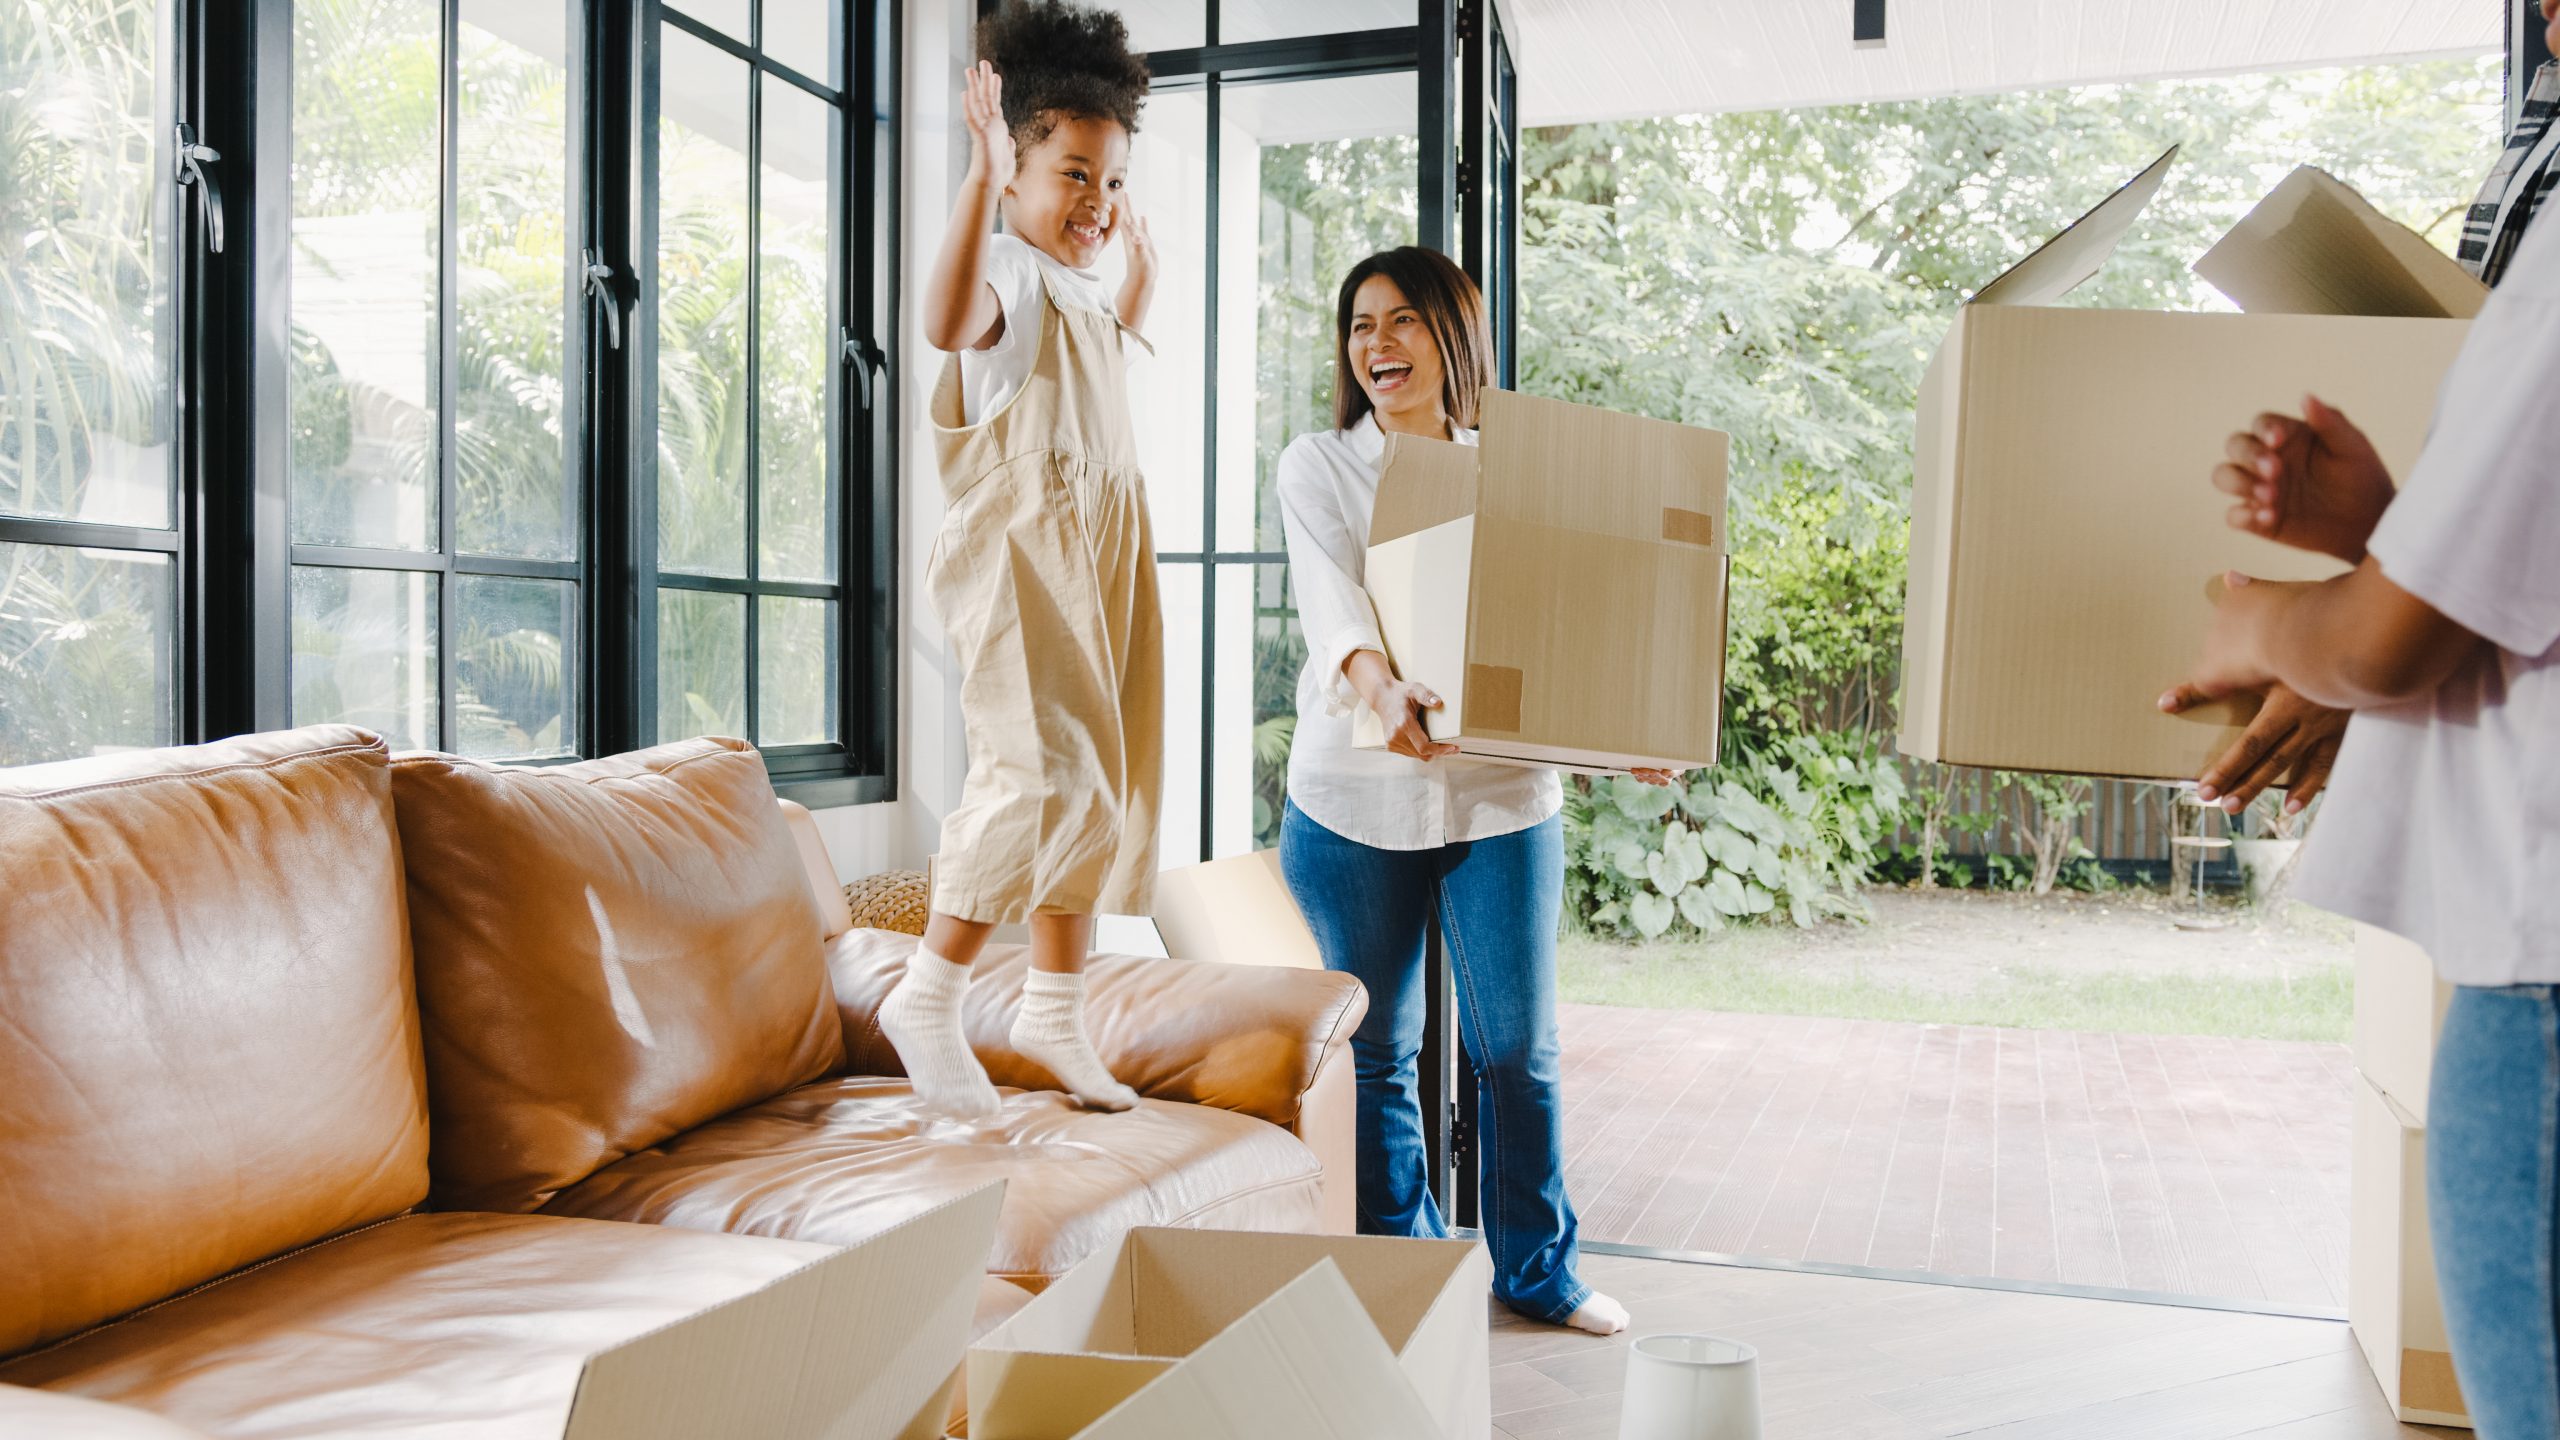 Making the Most of Your Move: How to Settle into Your New Home Quickly